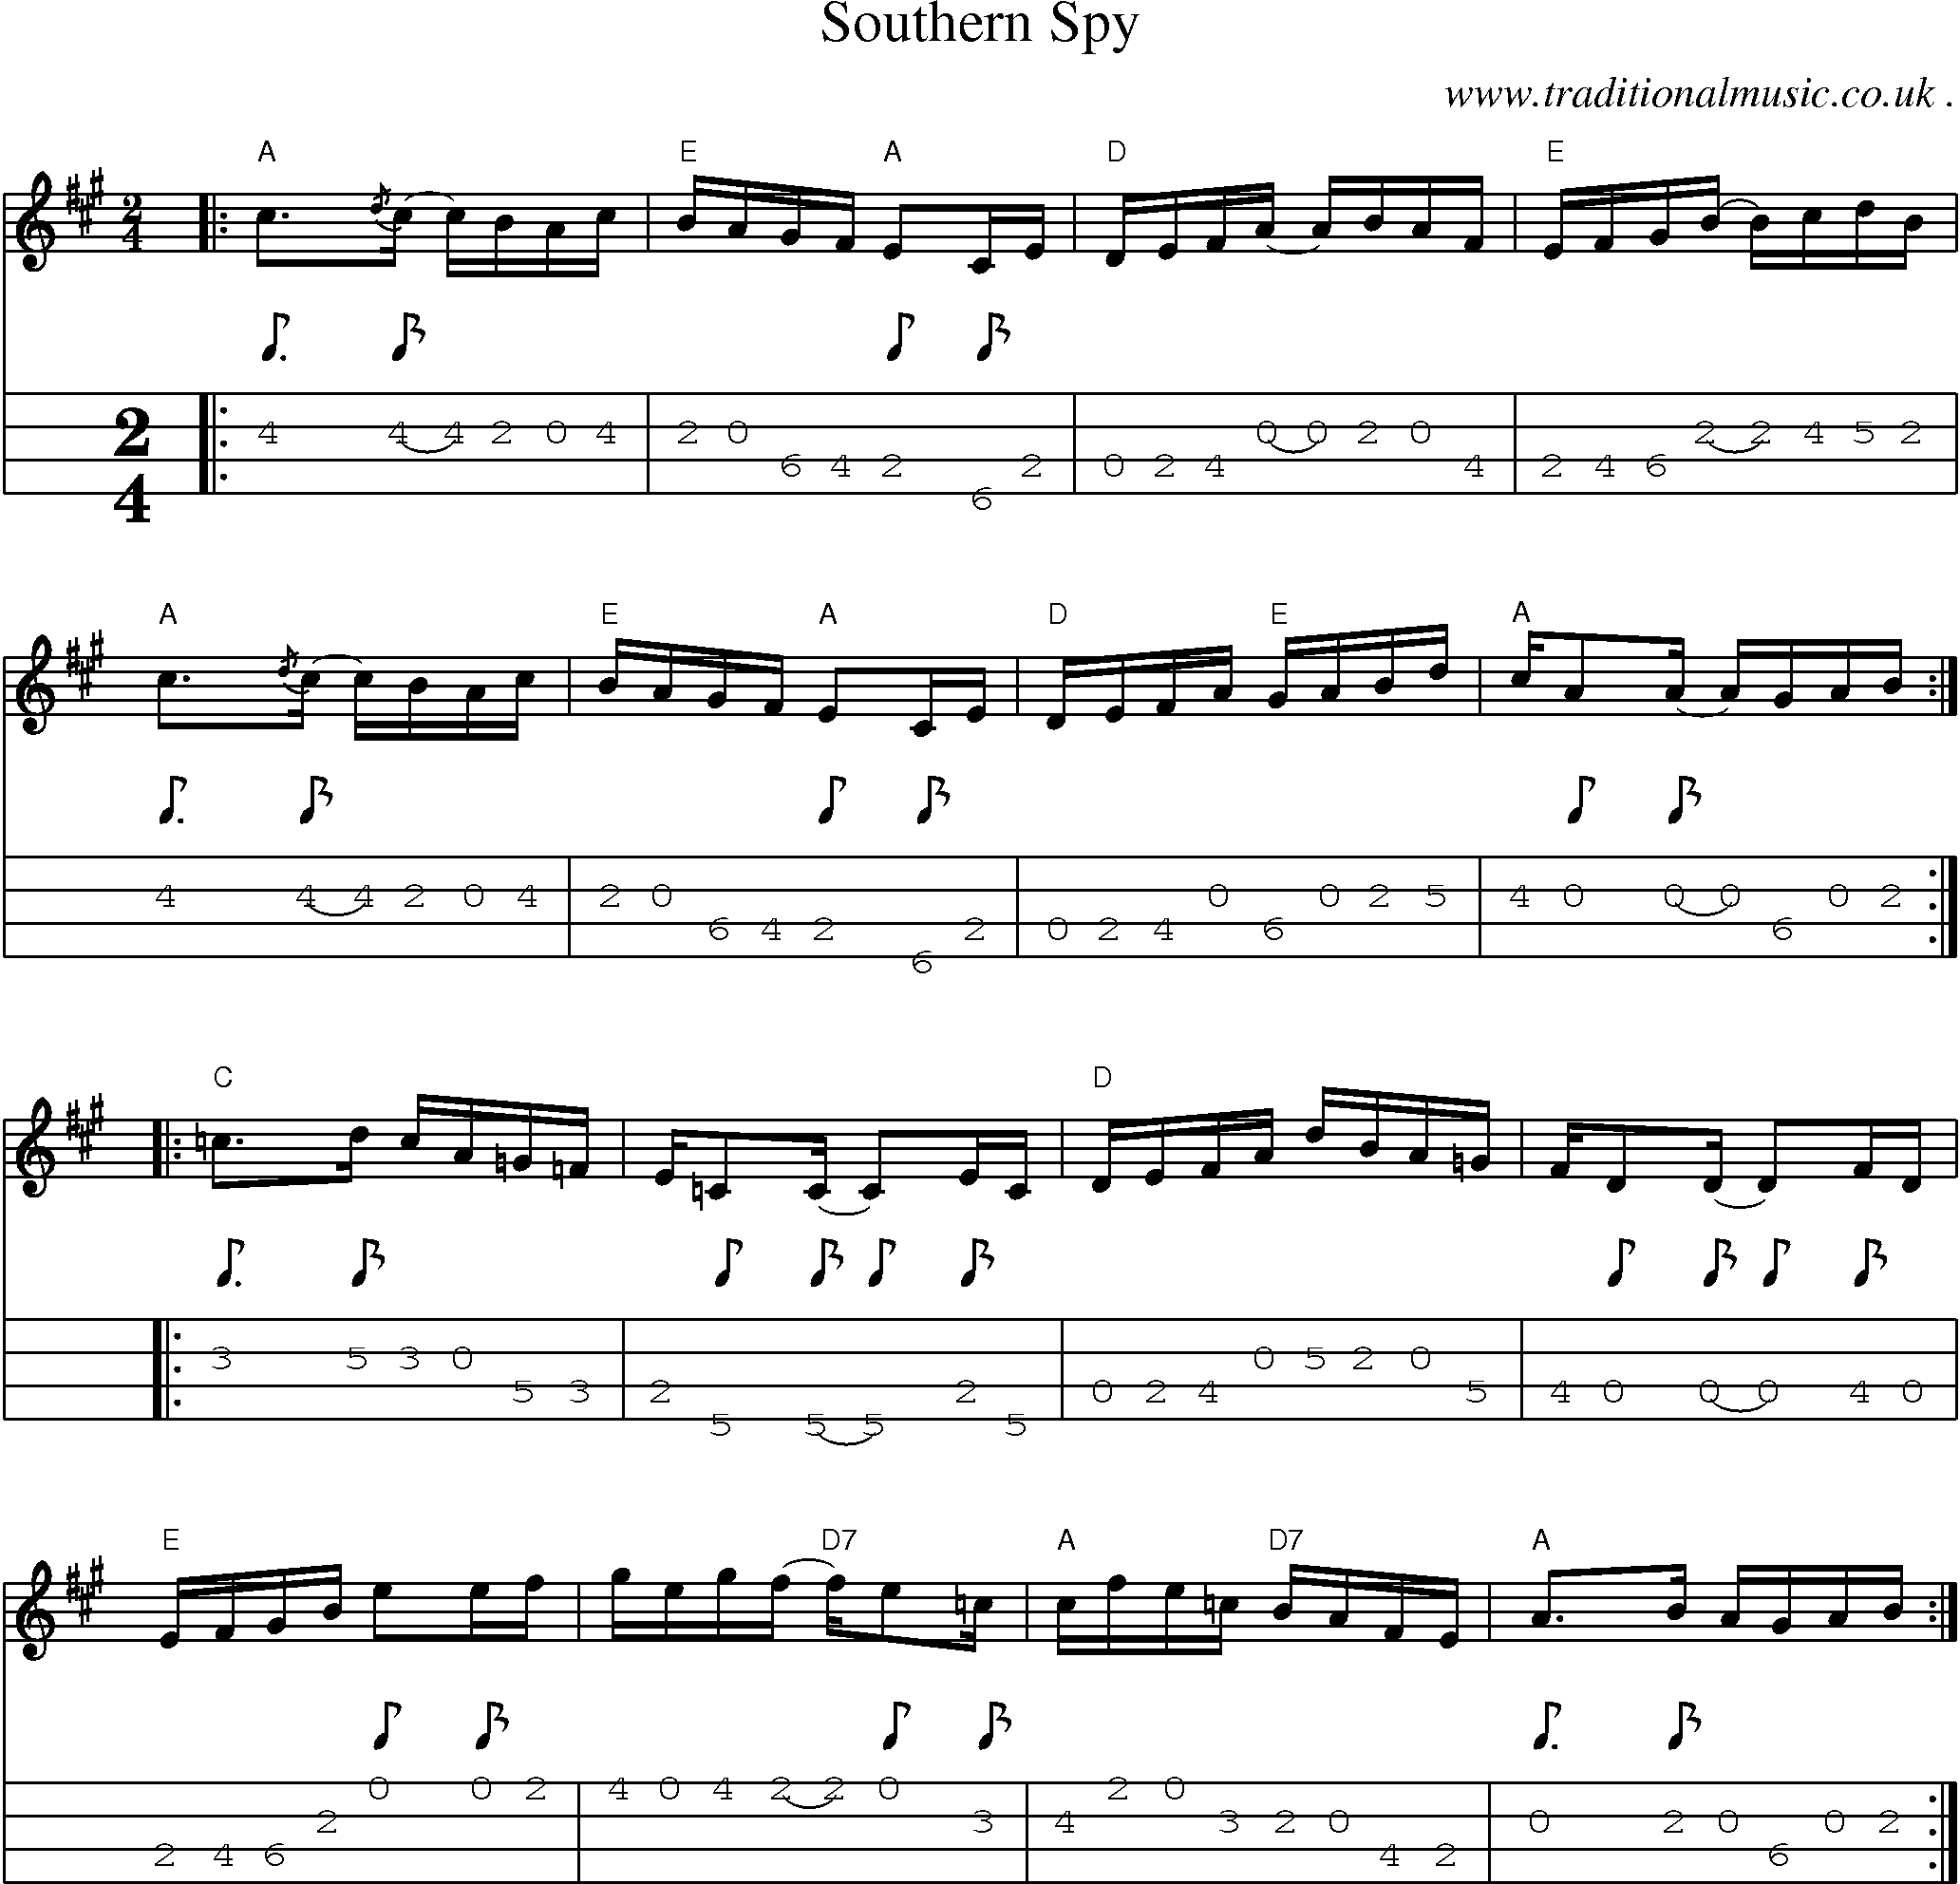 Music Score and Mandolin Tabs for Southern Spy